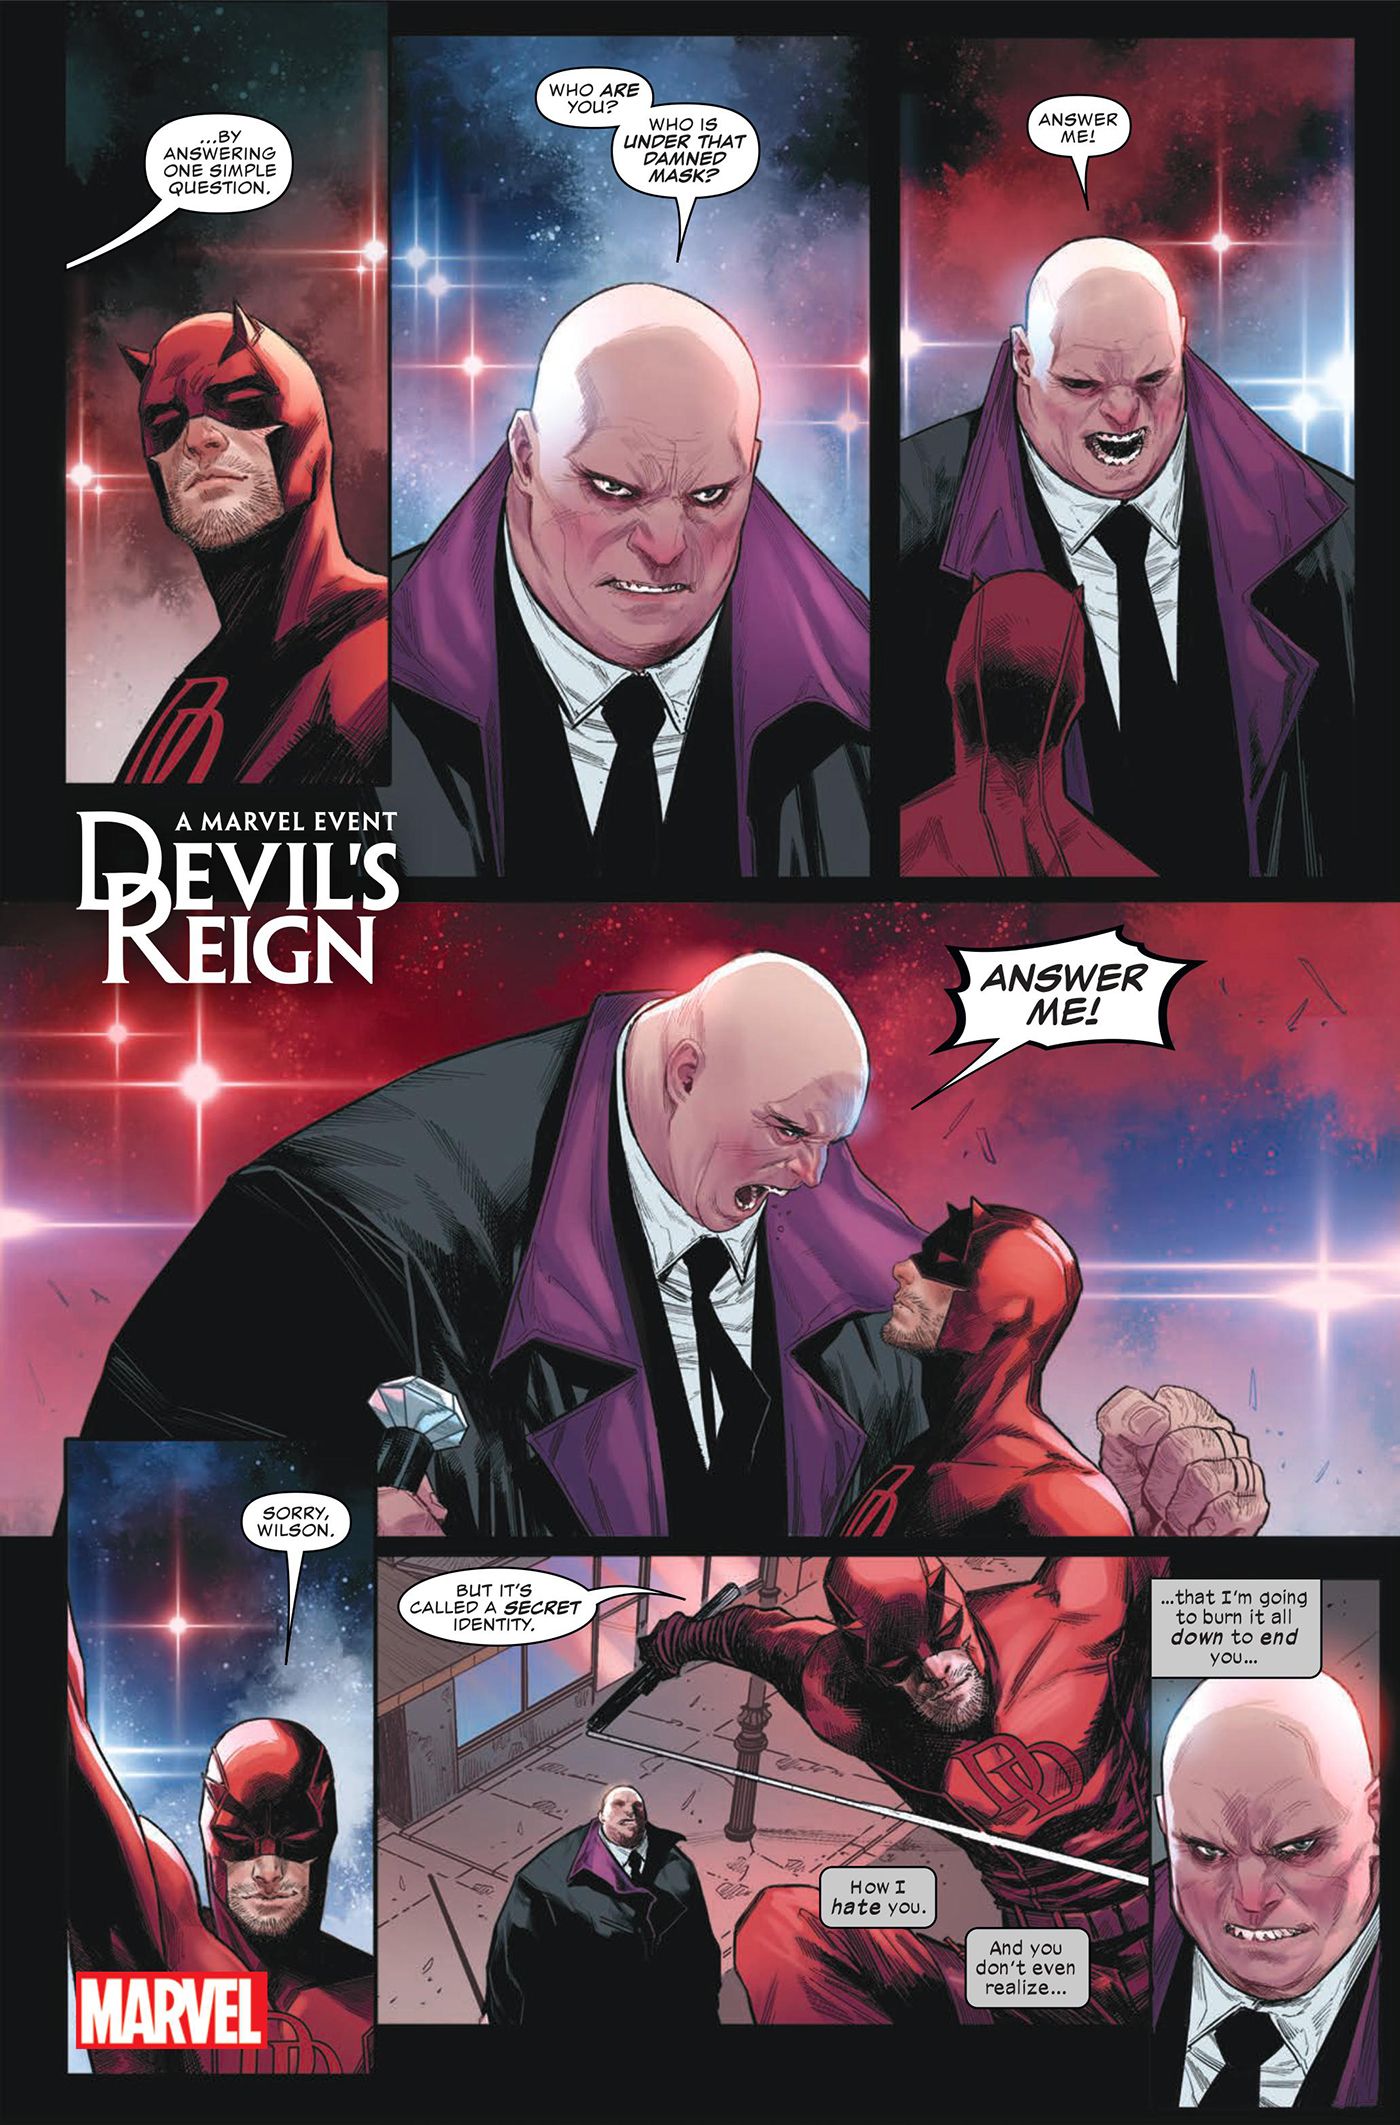 Daredevil and Kingpin have a verbal standoff as Fisk threatens the hero.